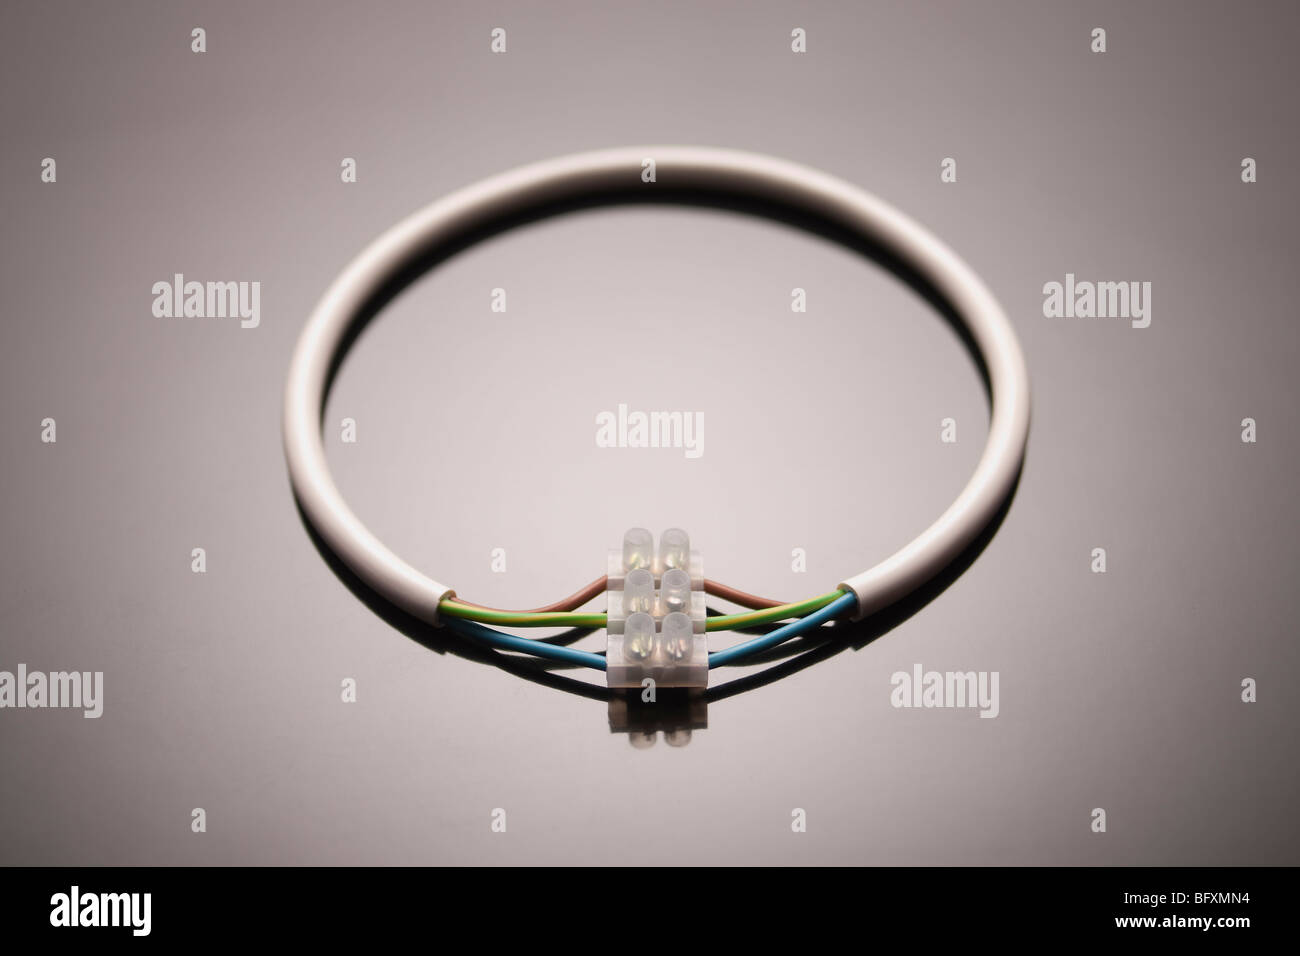 A circle of wire connected to itself Stock Photo